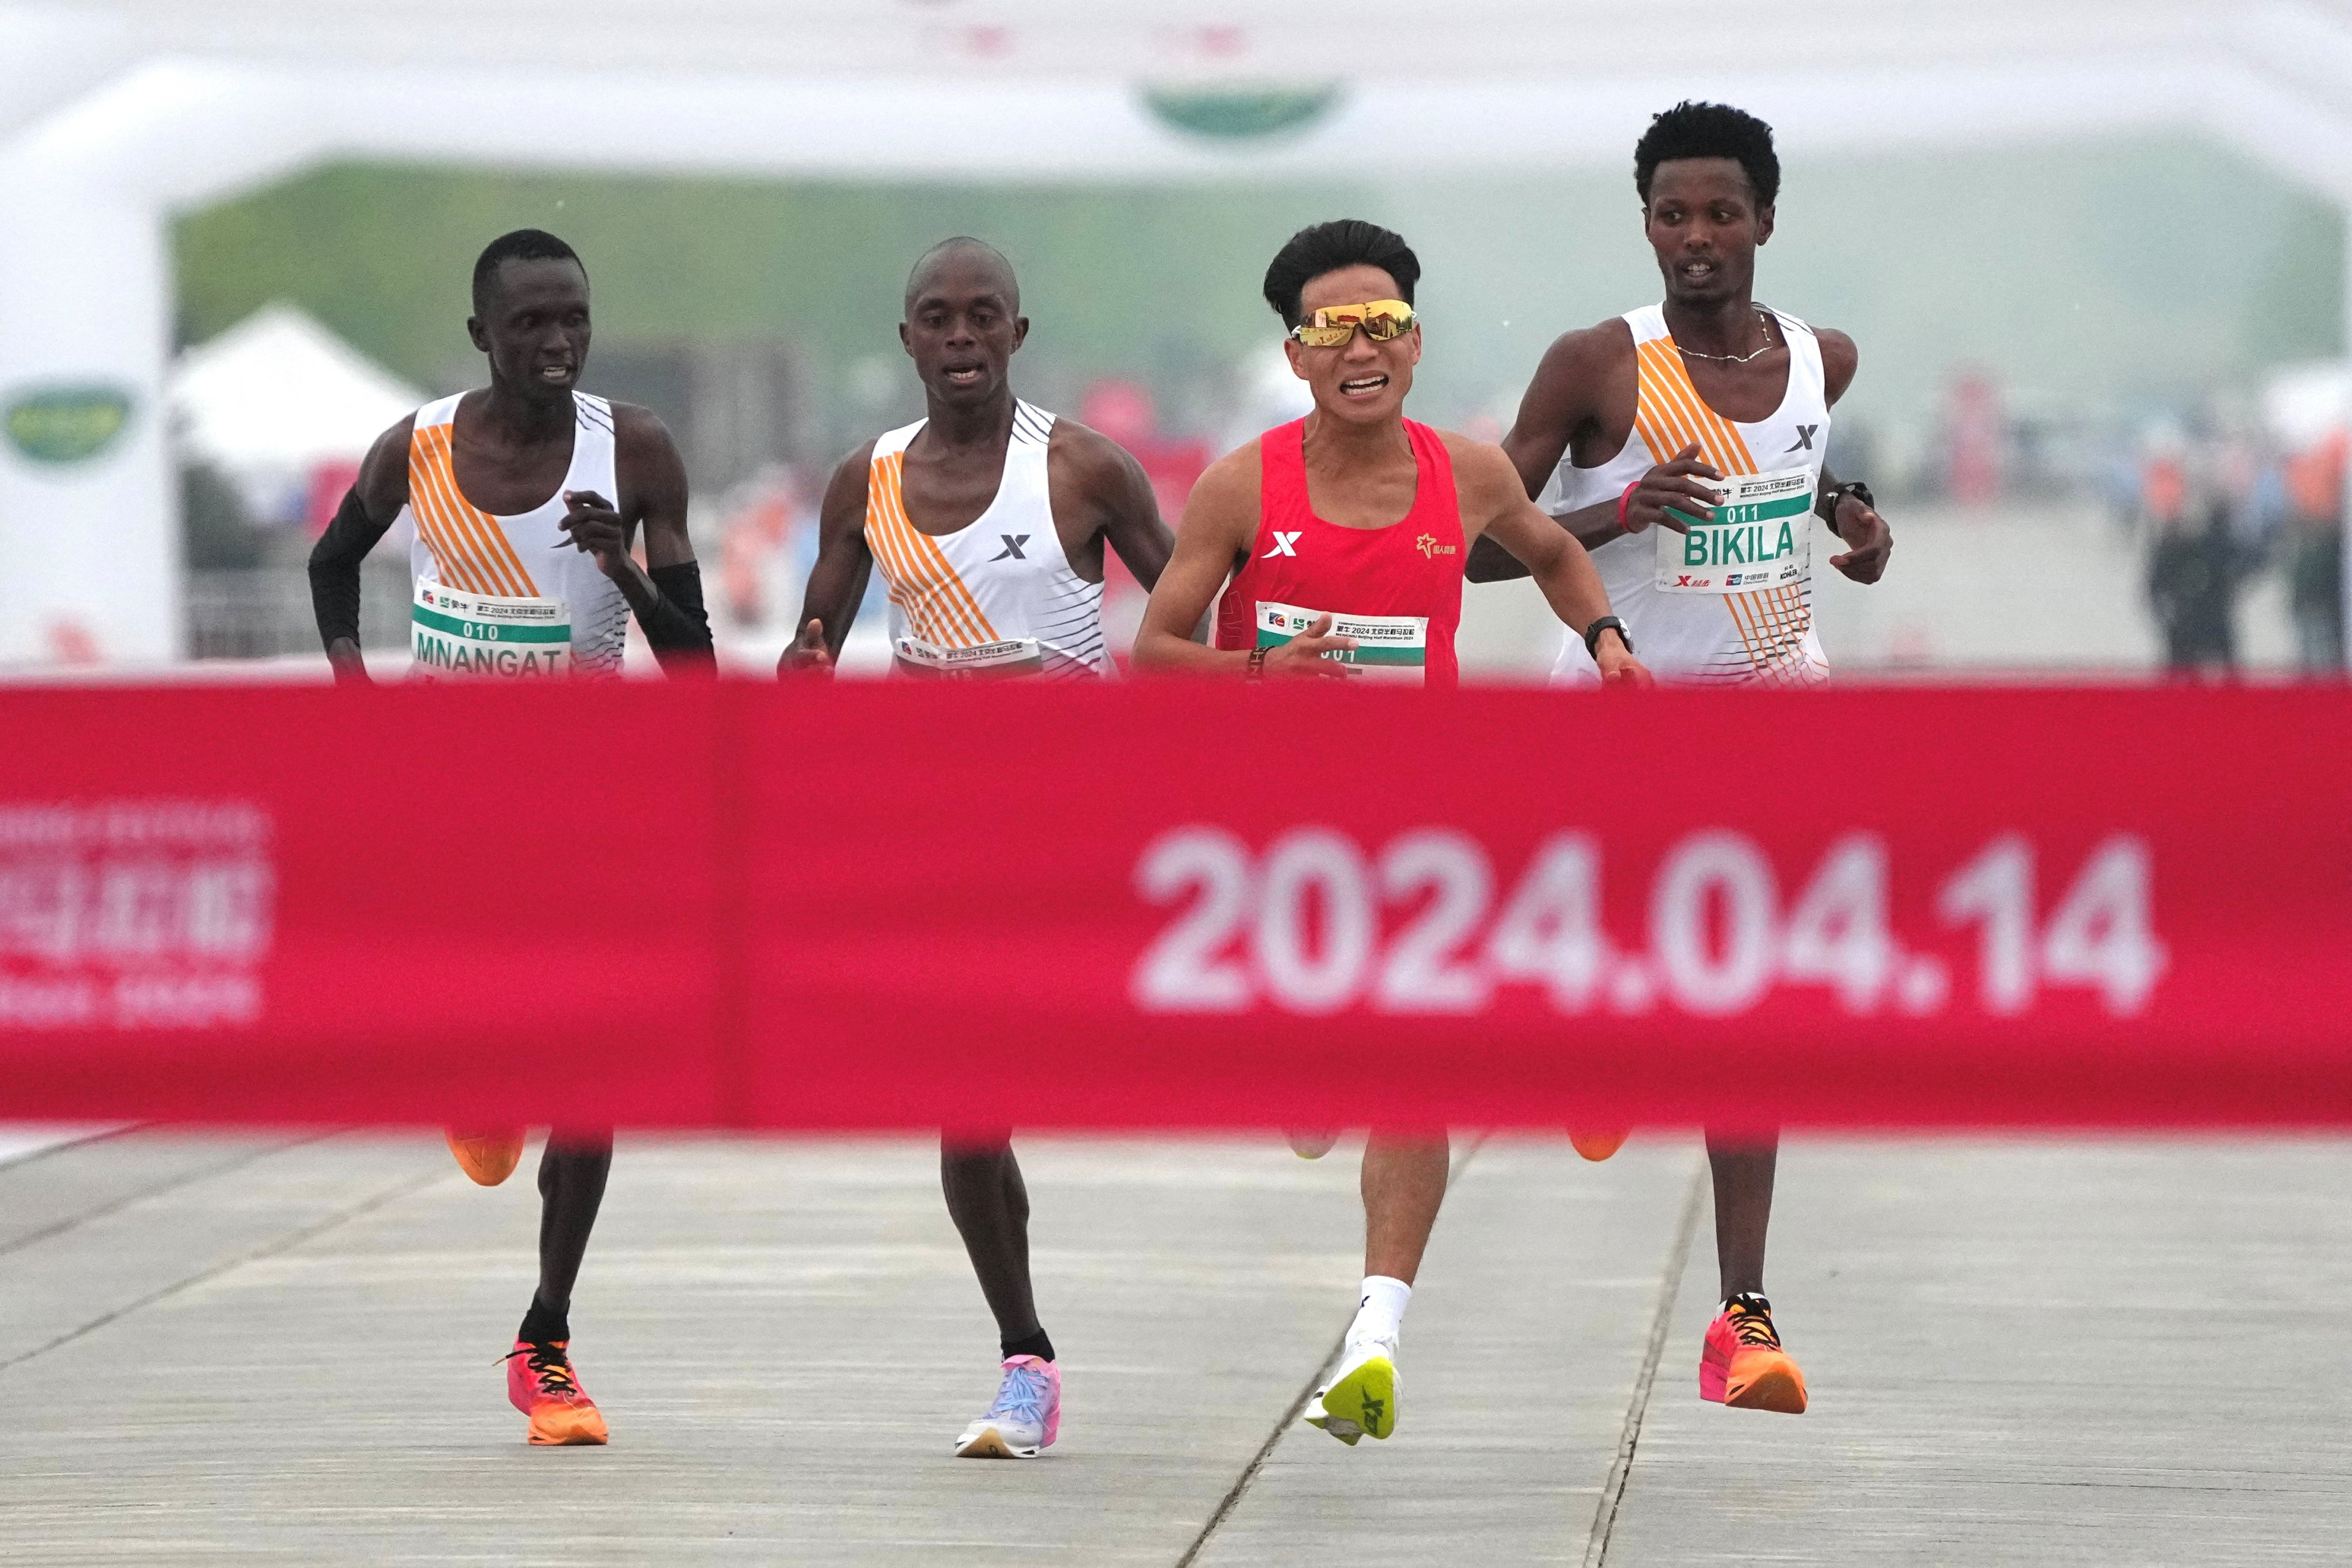 Chinese runner He Jie heads for the line ahead of (from left) Kenyans Willy Mnangat and Robert Keter, and Ethiopian Dejene Hailu Bikila. Photo: Reuters